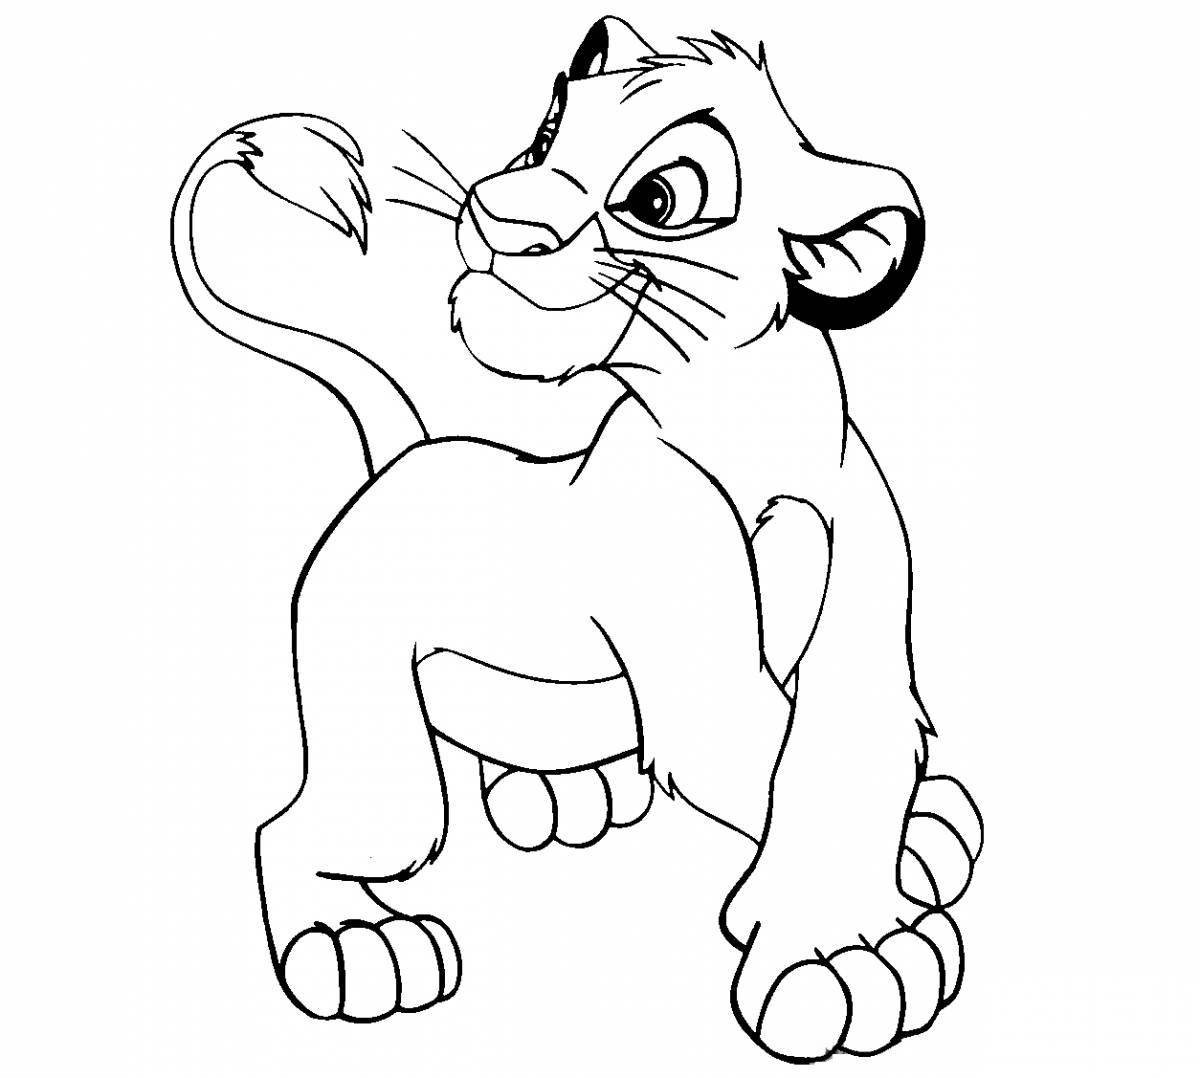 Colorful simba coloring page